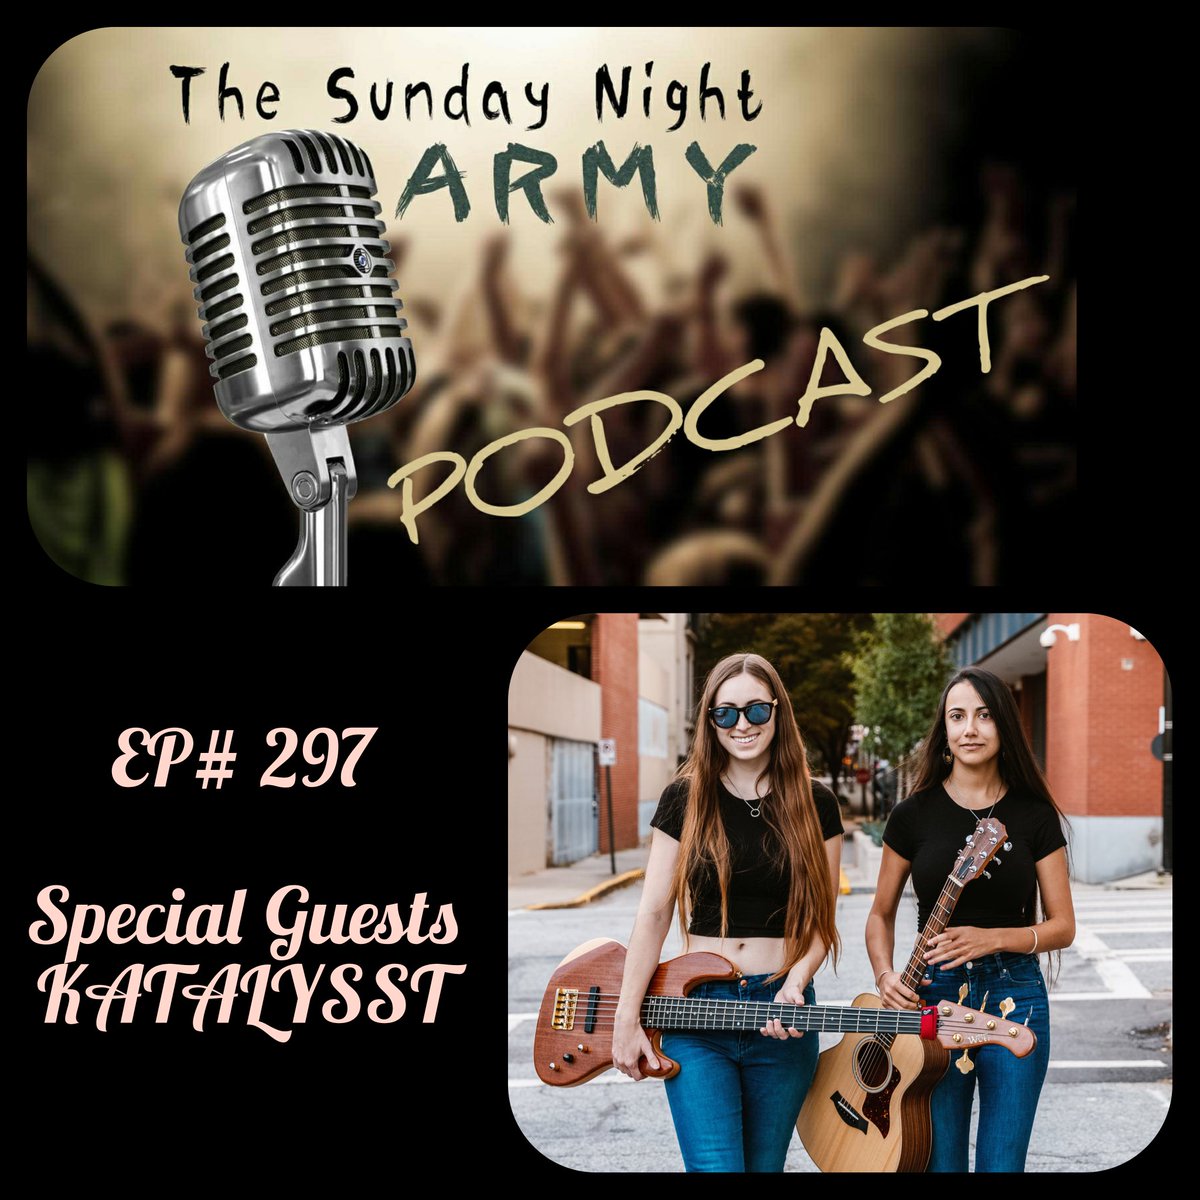 🌟NEW EPISODE🌟 Guests KATALYSST Apple👇 podcasts.apple.com/us/podcast/the… Spotify👇 open.spotify.com/show/7k7KVAhMR… #podcast #podcasts #music #PodcastAndChill #sundayvibes #HappyNewYear2024 #HappyNewYear #NewYear2024 #abcnye #trending #Spotify #artist